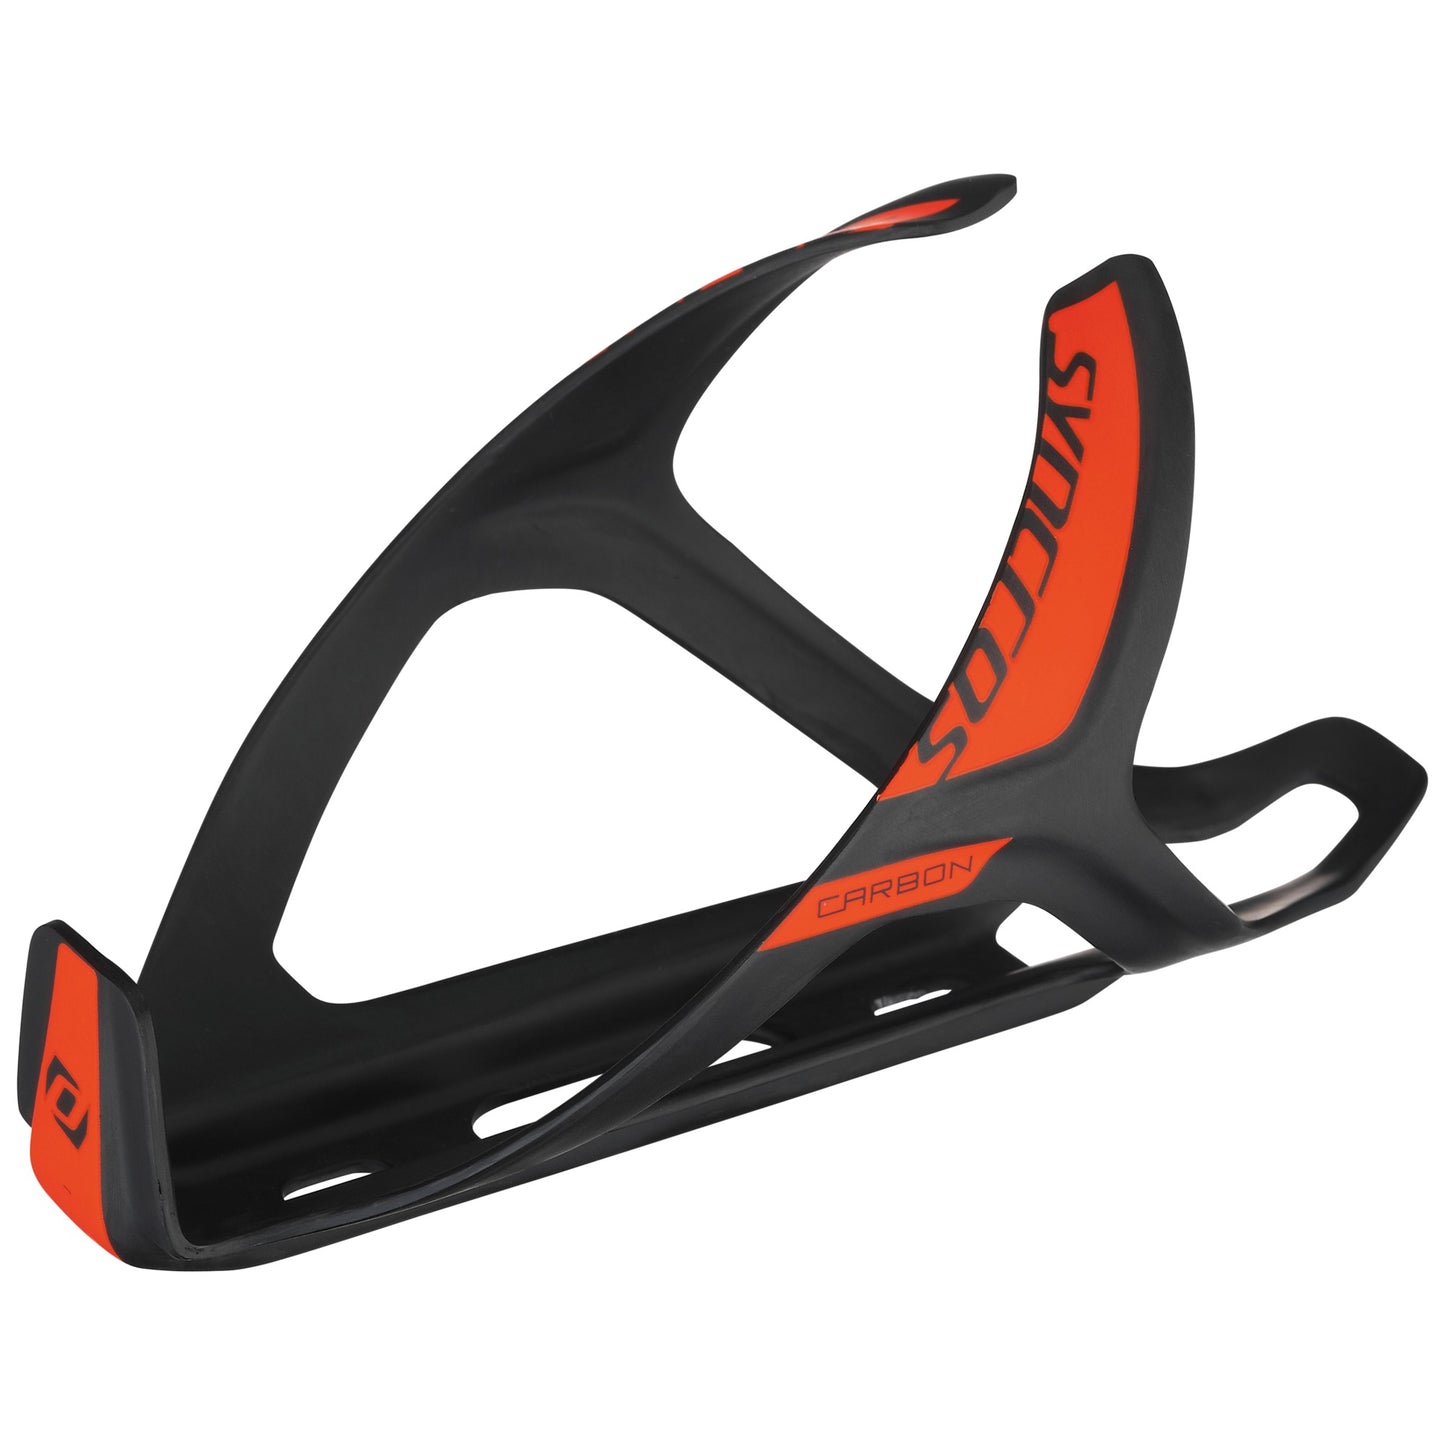 Syncros Bottle cage Carbon 1.0